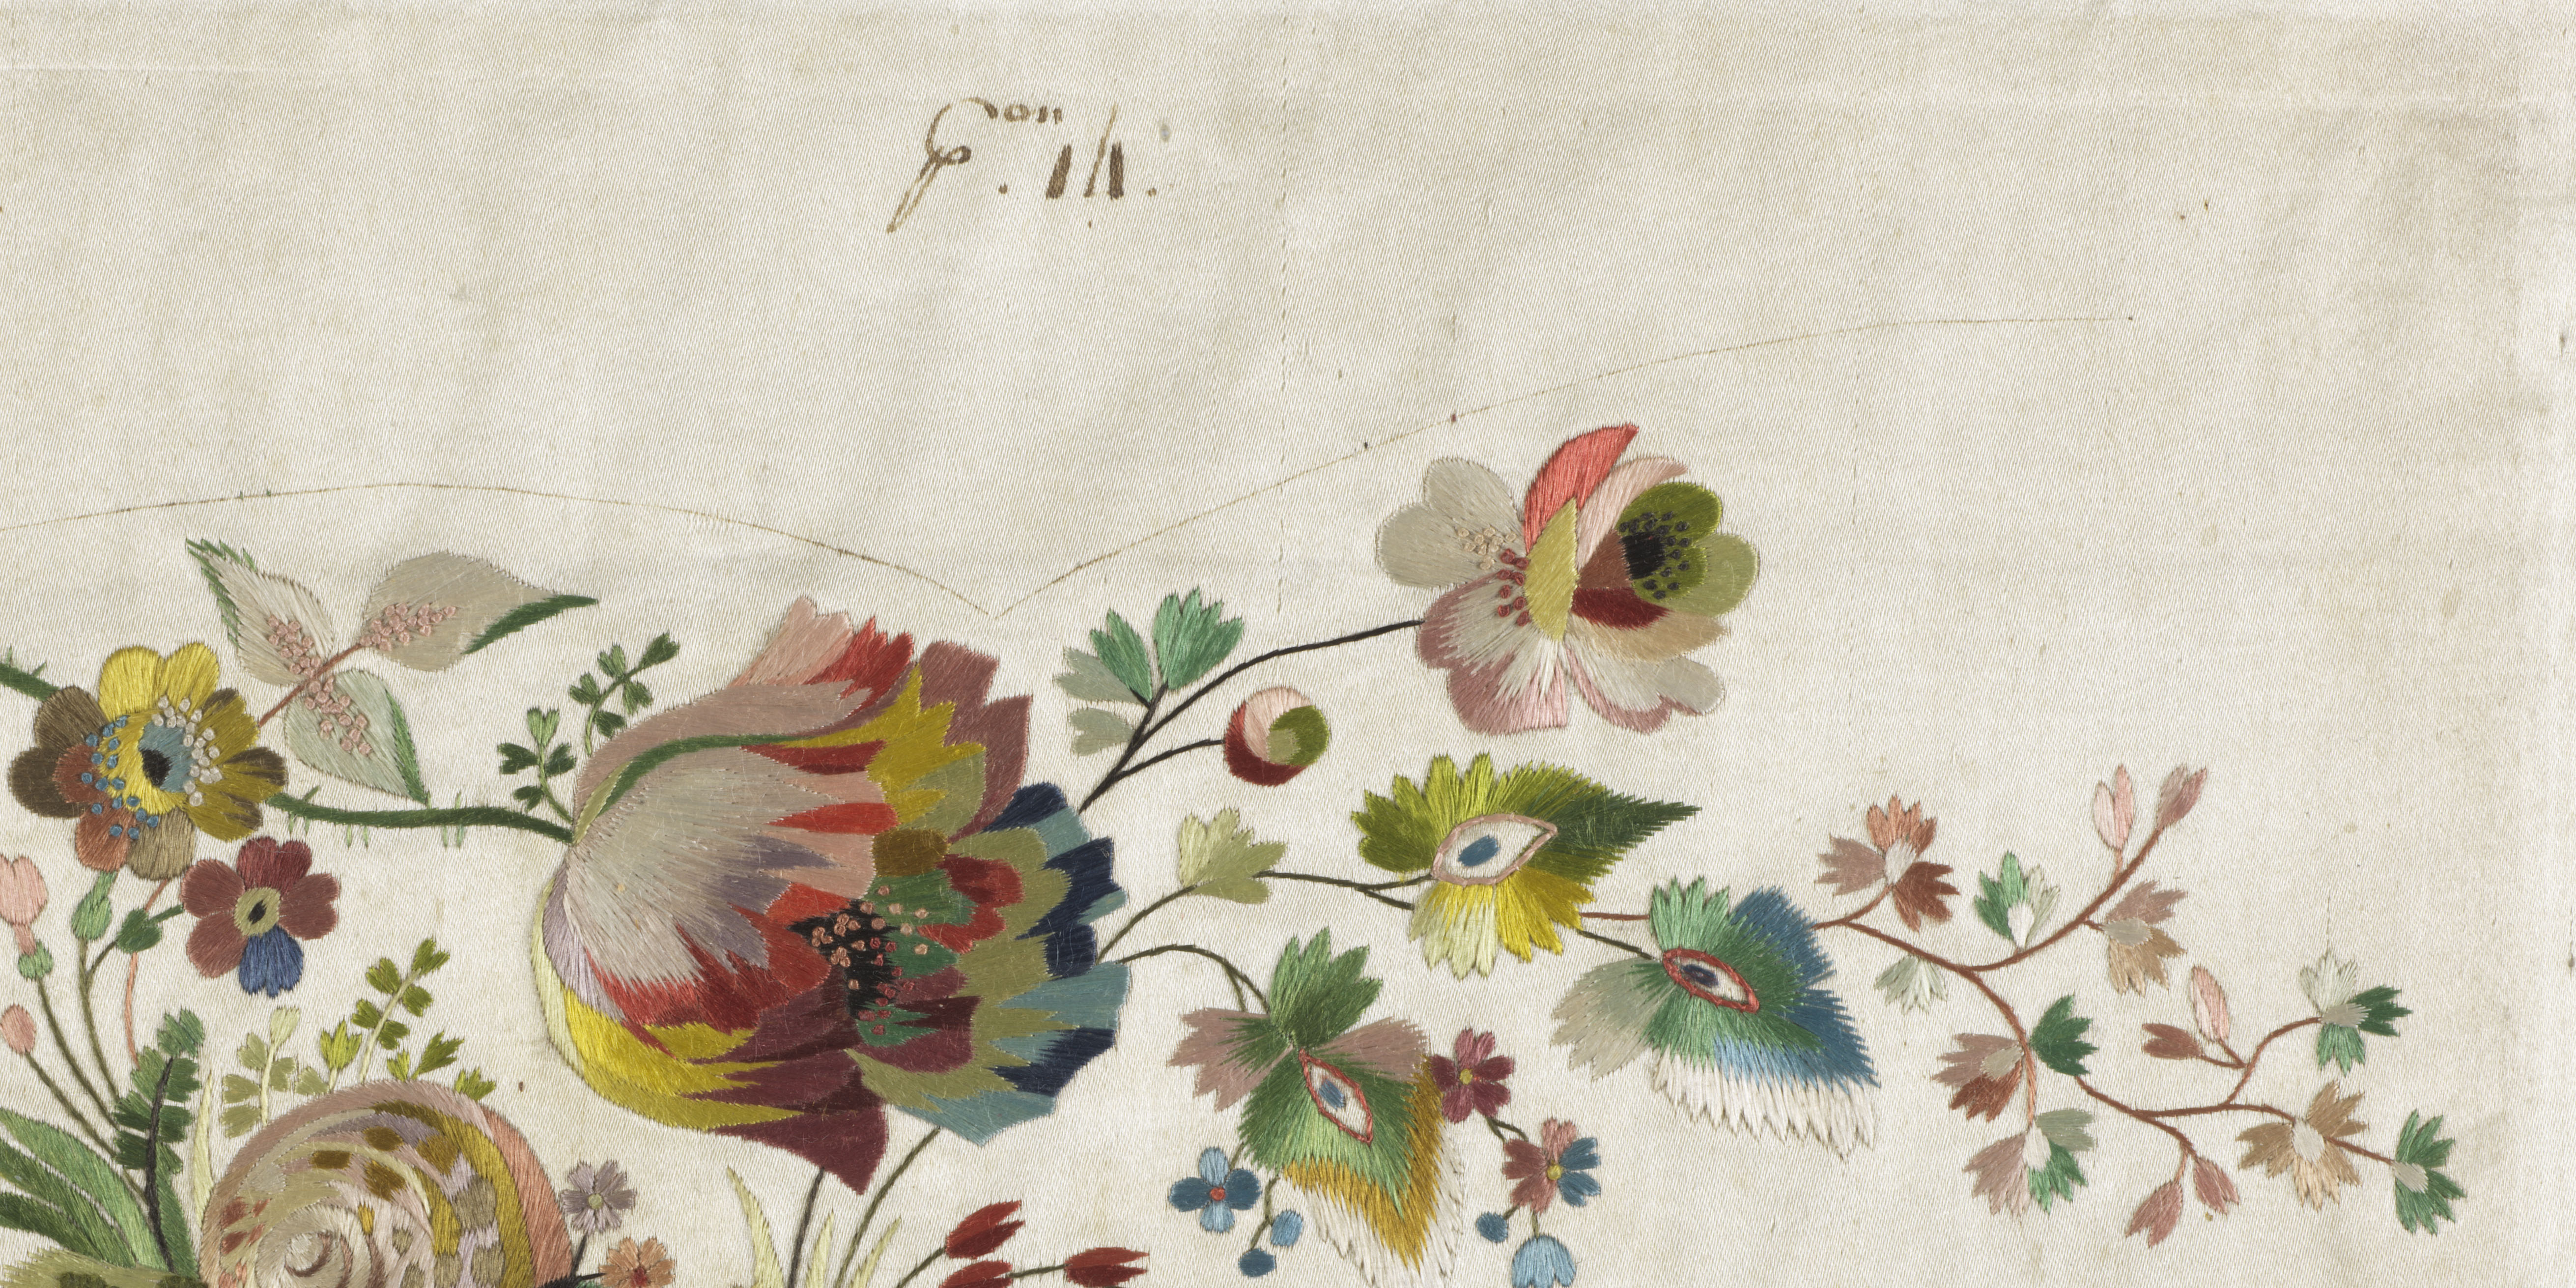 Embroidered flowers in rich warm tones on a white cloth. Flowers fill the bottom half of the image.